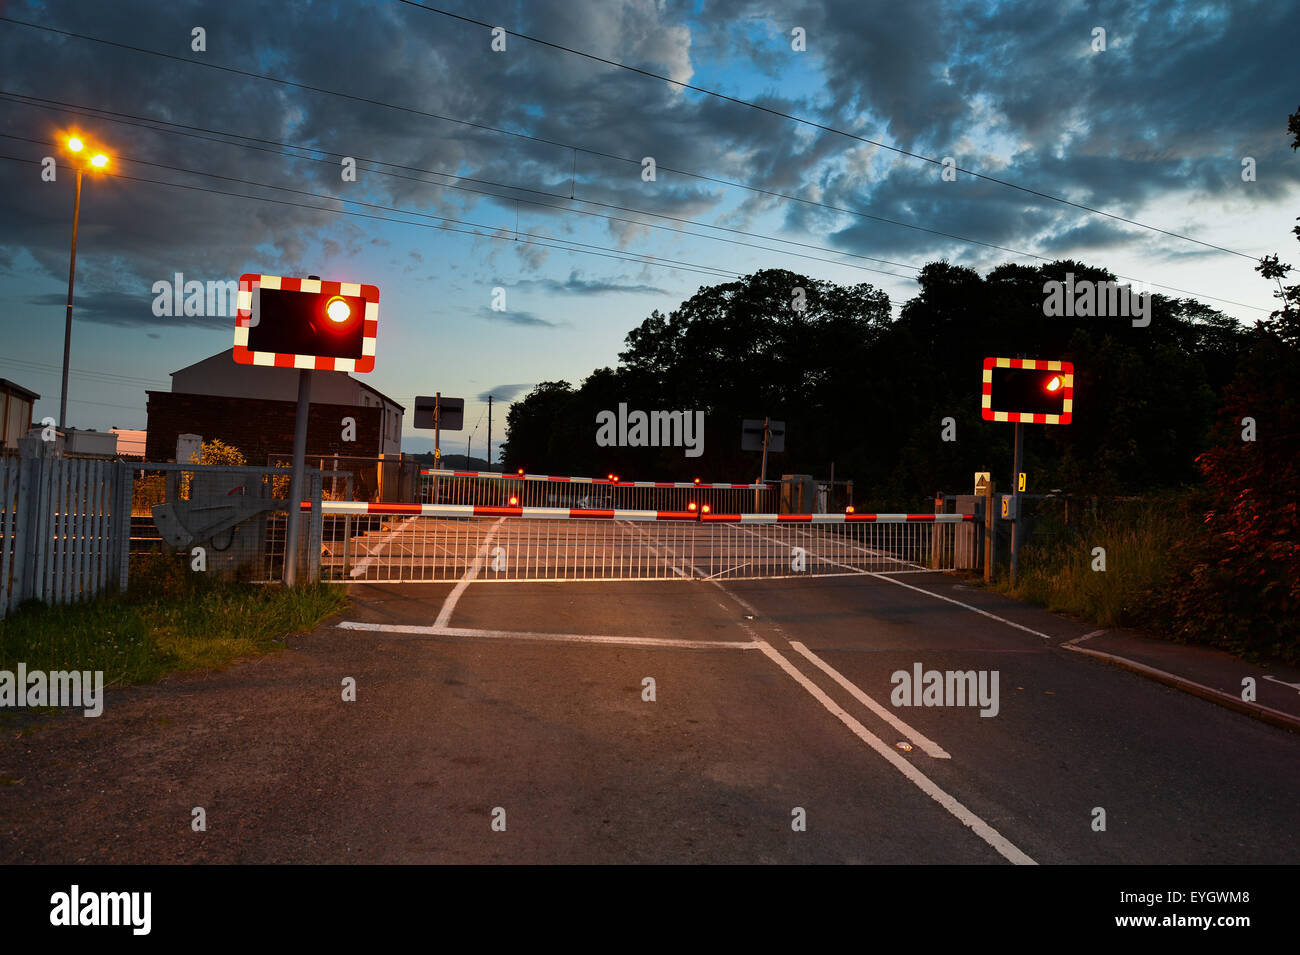 A railway level crossing at night with the barriers down and the lights at red. Stock Photo